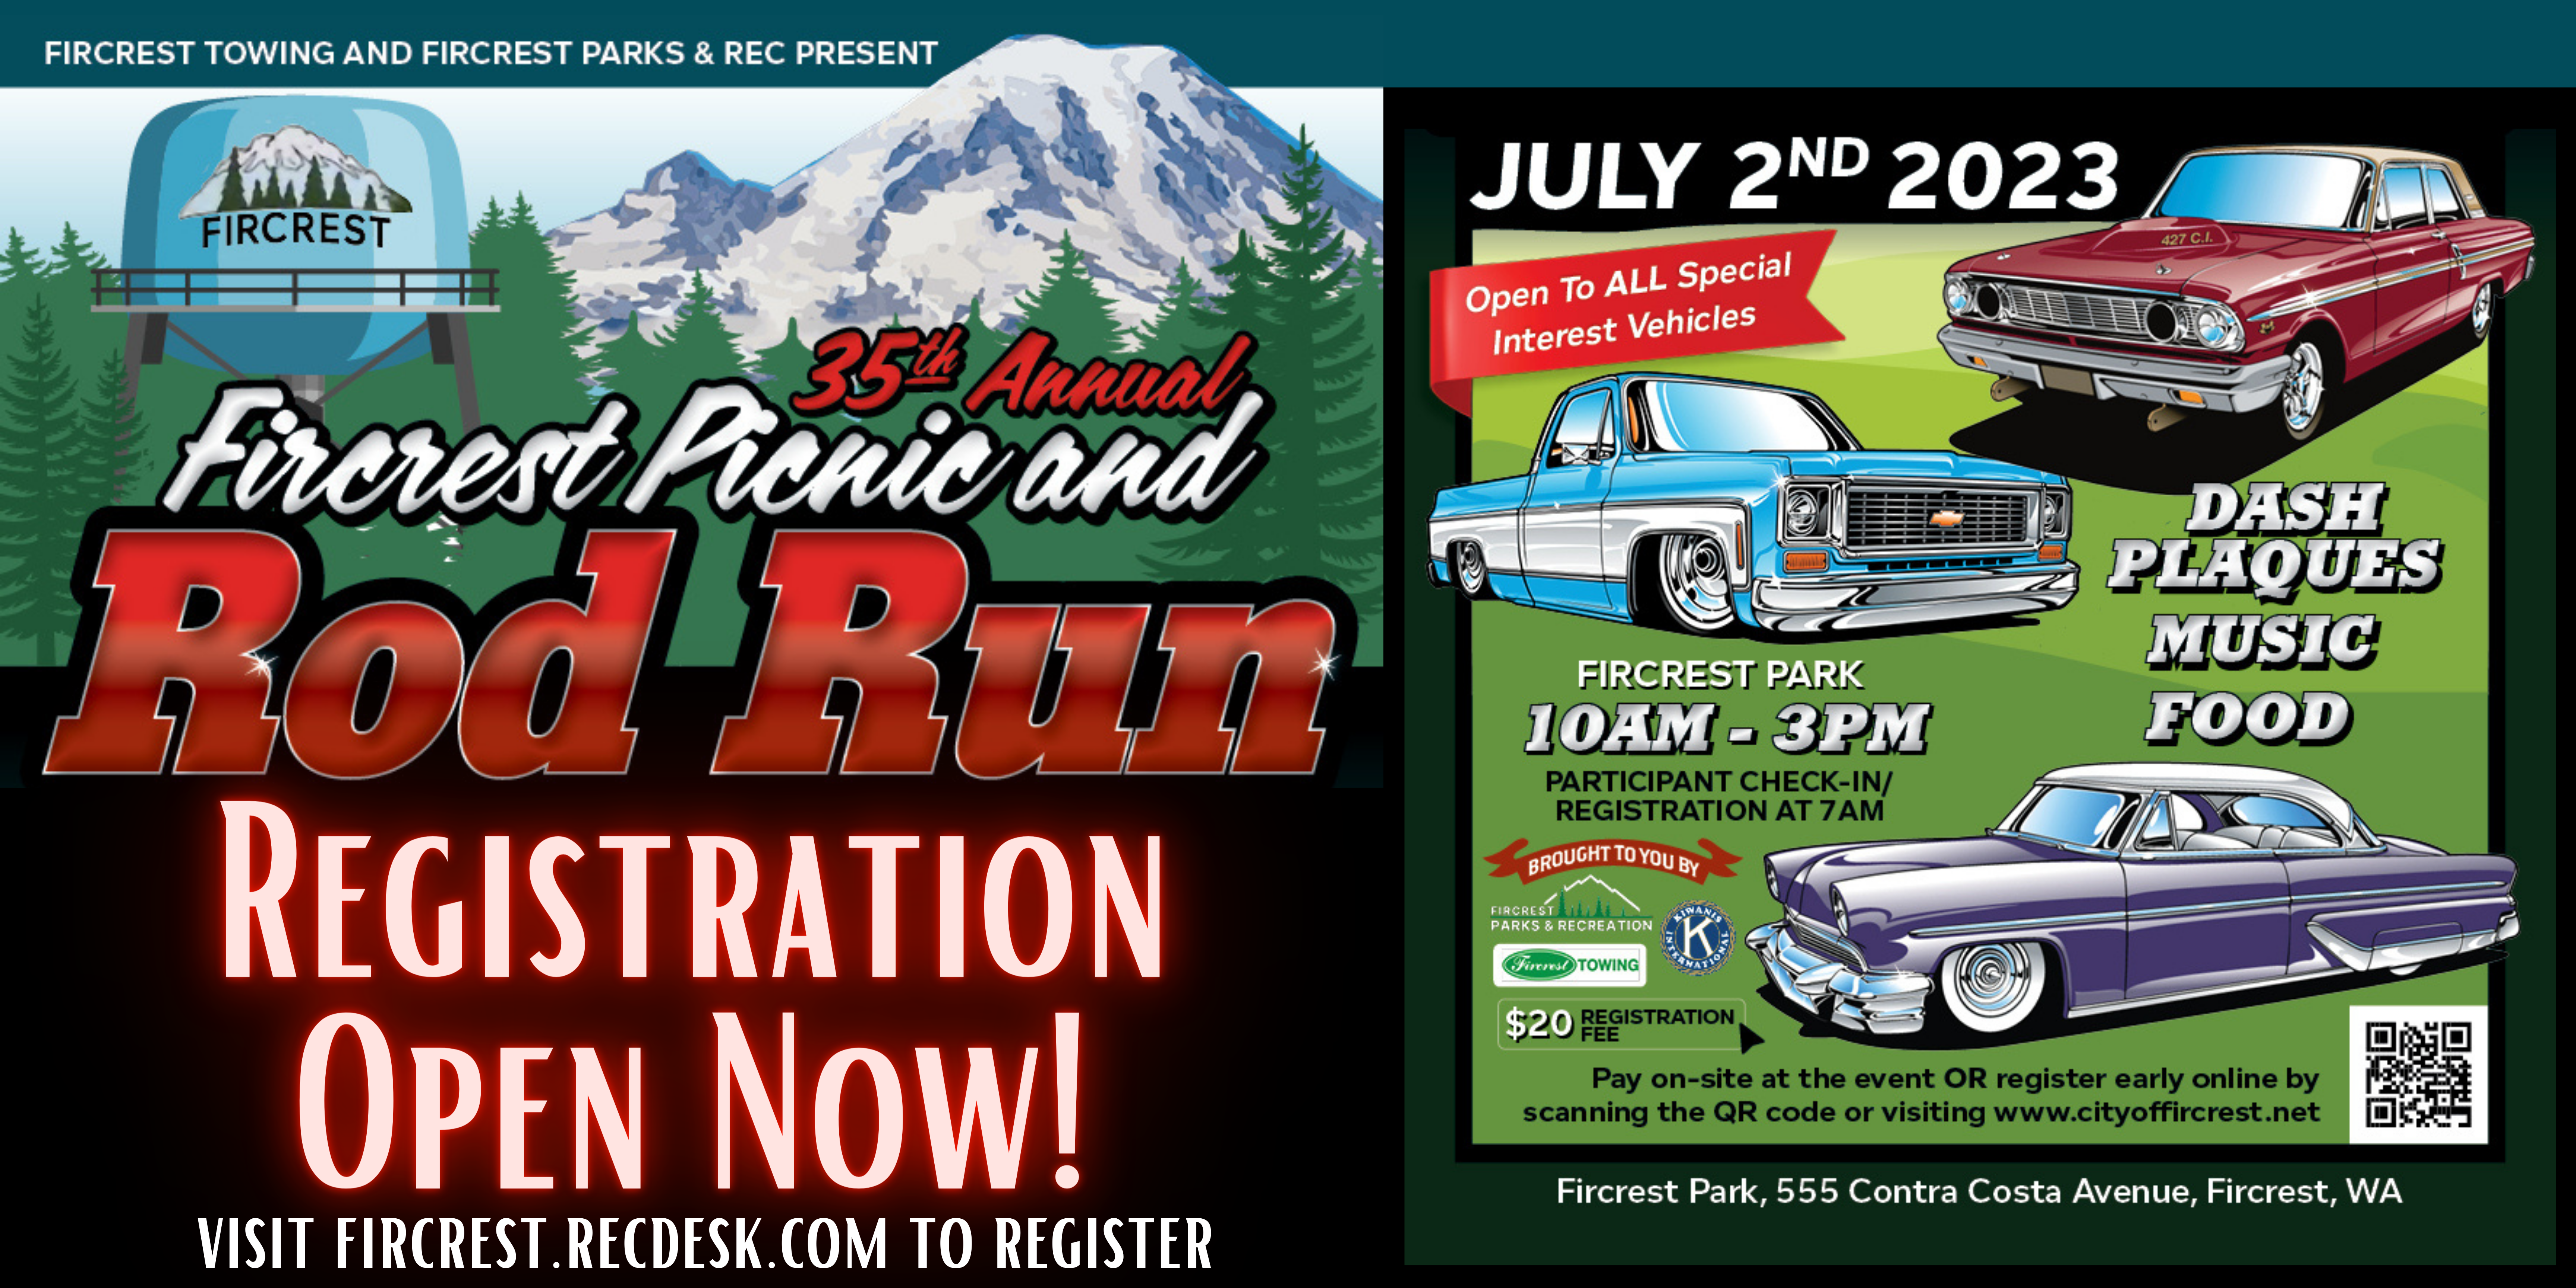 Banner for the Fircrest Picnic and Rod Run with text reading: Fircrest Towing and Fircrest Parks & Rec Present 35th Annual Fircrest Picnic and Rod Run Registration Open Now! Visit fircrest.recdesk.com to register. July 2nd 2023 - Open to ALL Special Interest Vehicles - Dash Plaques, music, food - Fircrest Park 10AM-3PM - Participant check-in / registration at 7AM - Brought to you by Fircrest Parks and Recreation, Fircrest Towing, Fircrest Kiwanis, $20 registration fee. Pay on-site at the event OR register early online by scanning the QR code or visiting www.cityoffircrest.net - Fircrest Park - 555 Contra Costa Avenue, Fircrest, WA - Links to the Rod Run Registration page